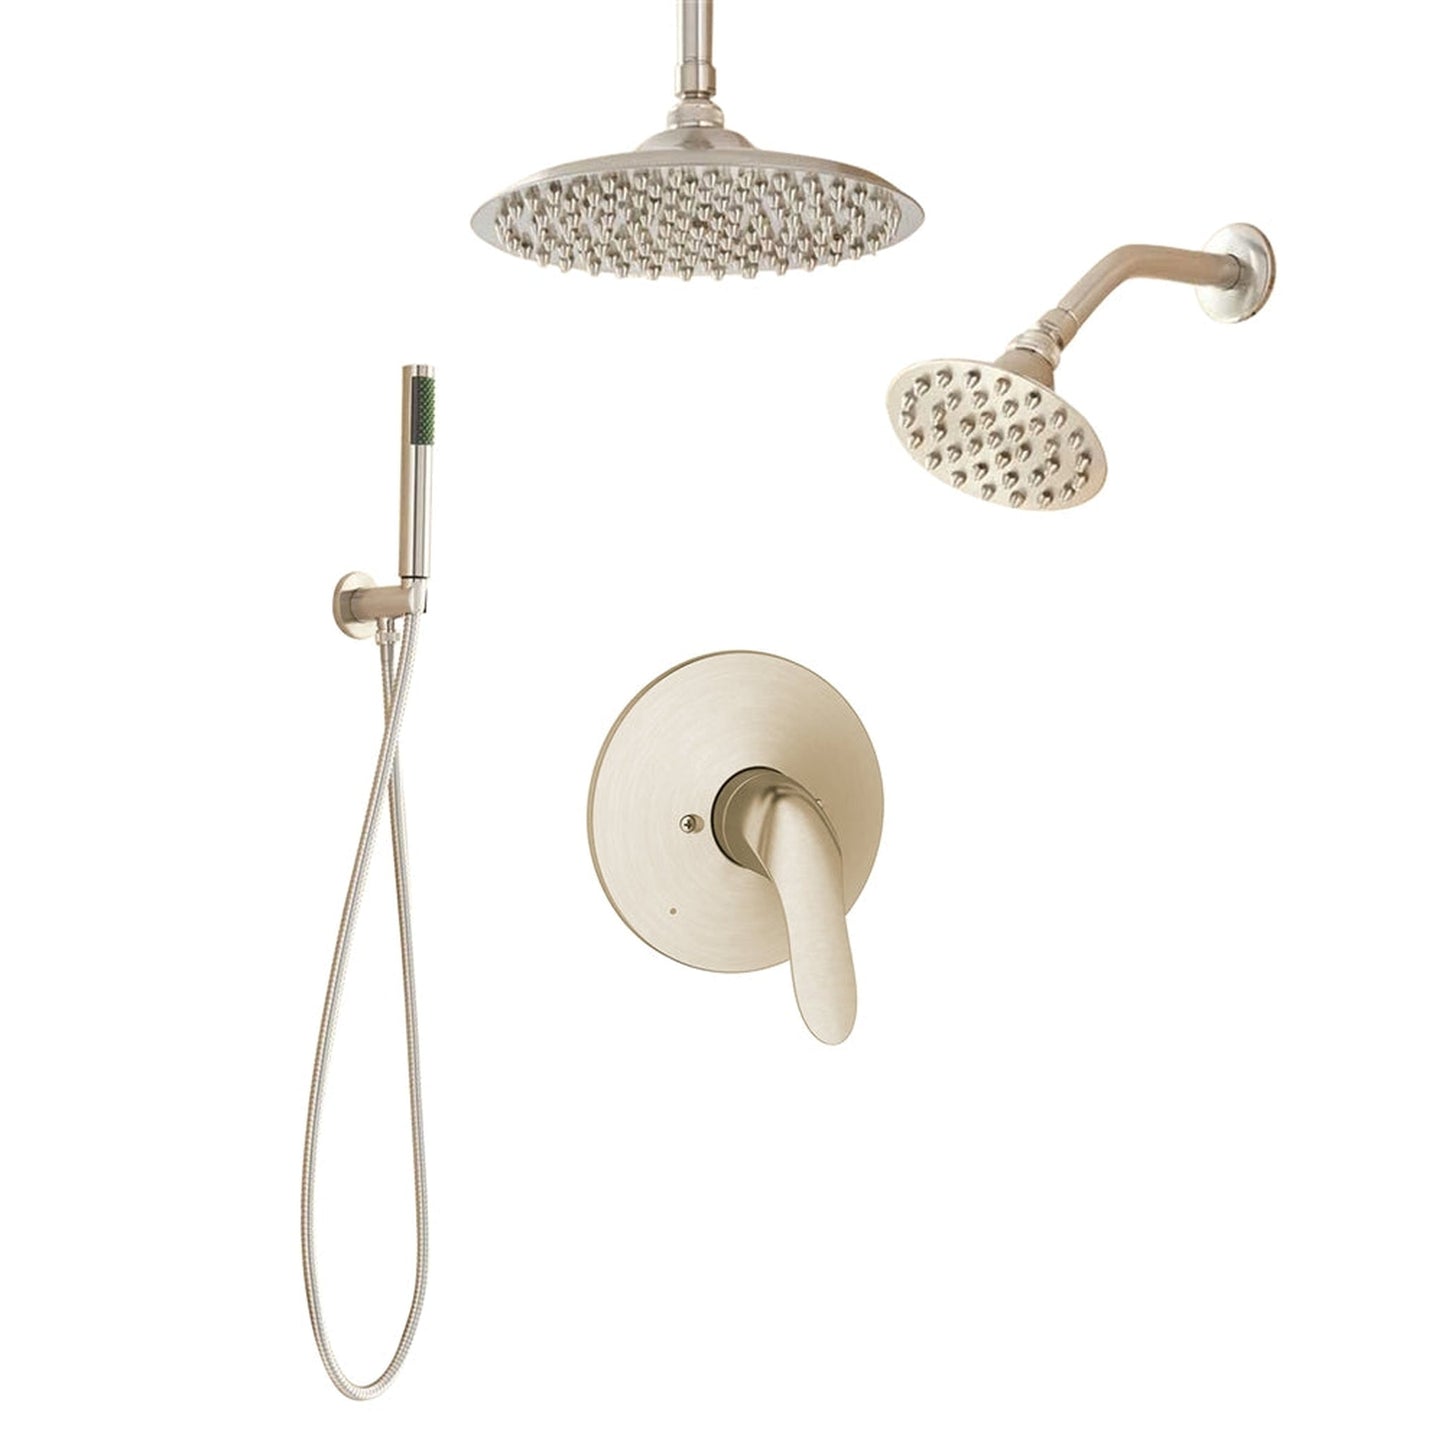 Fontana 10" Brushed Nickel Dual Round Shower Heads With Hand Shower